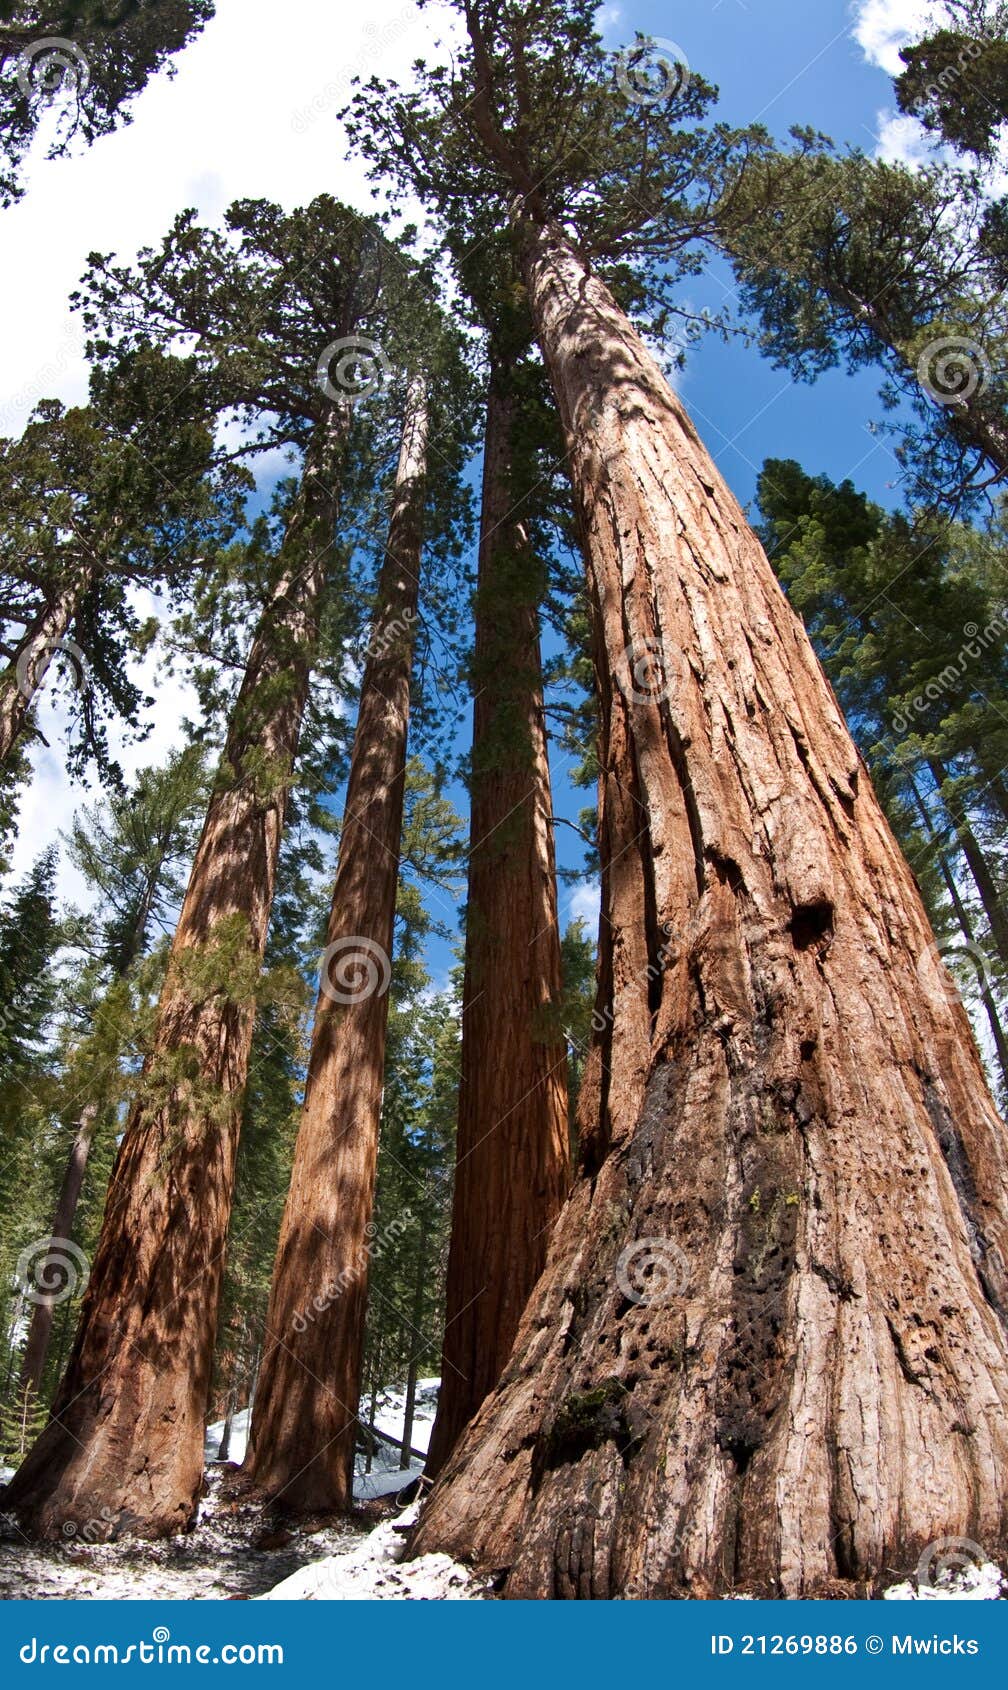 giant redwood trees - bachelor and 3 graces